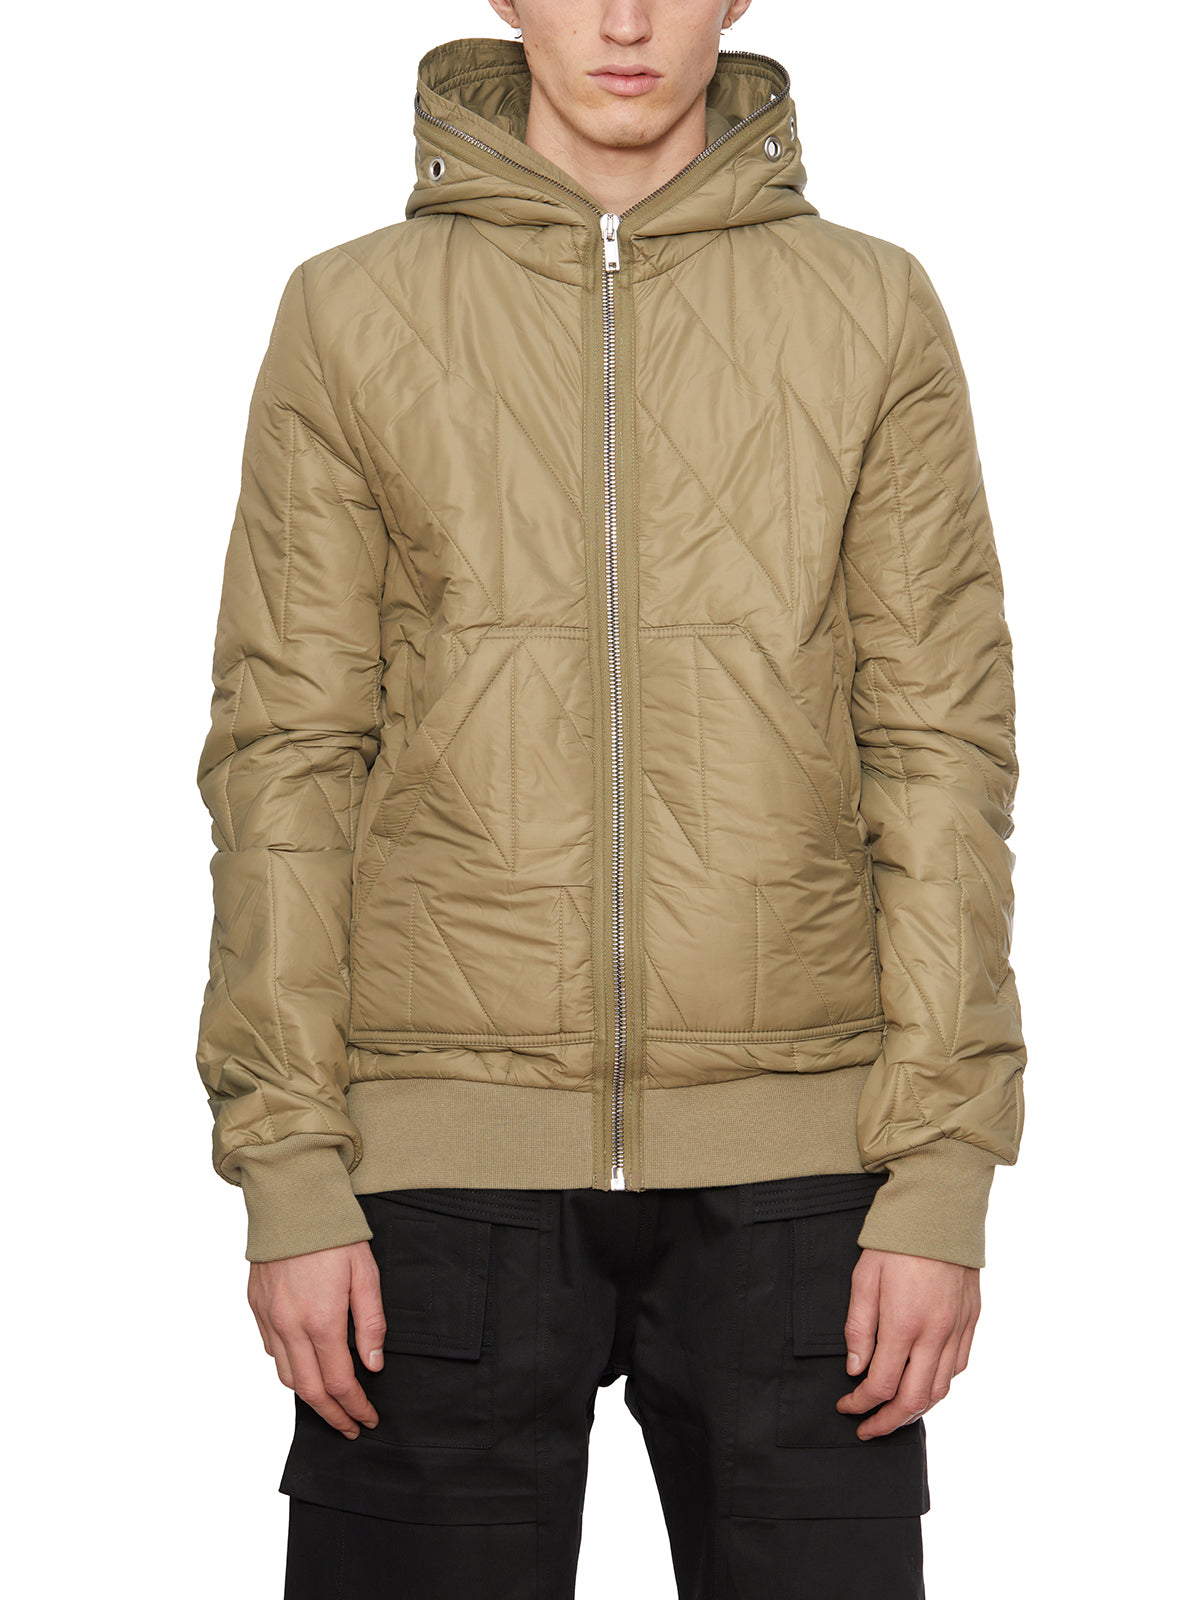 RICK OWENS Green Bomber Jacket with Hood for Men - FW23 Collection